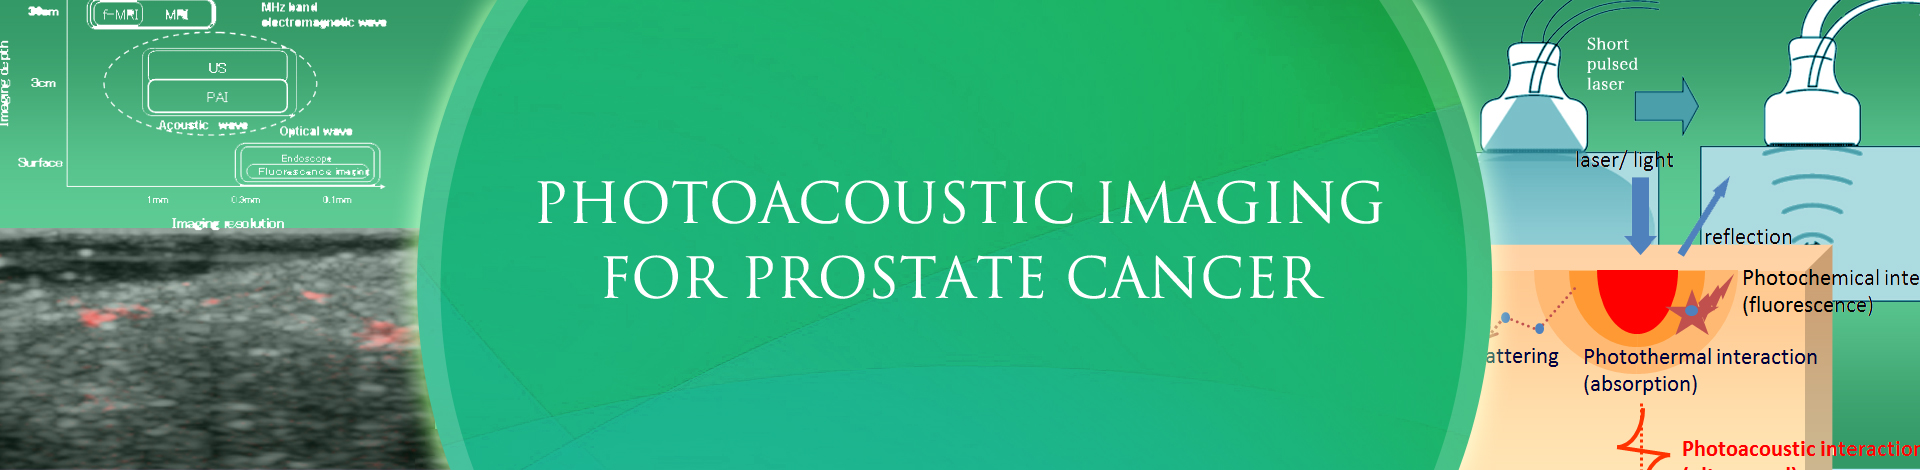 PHOTOACOUSTIC IMAGING FOR PROSTATE CANCER